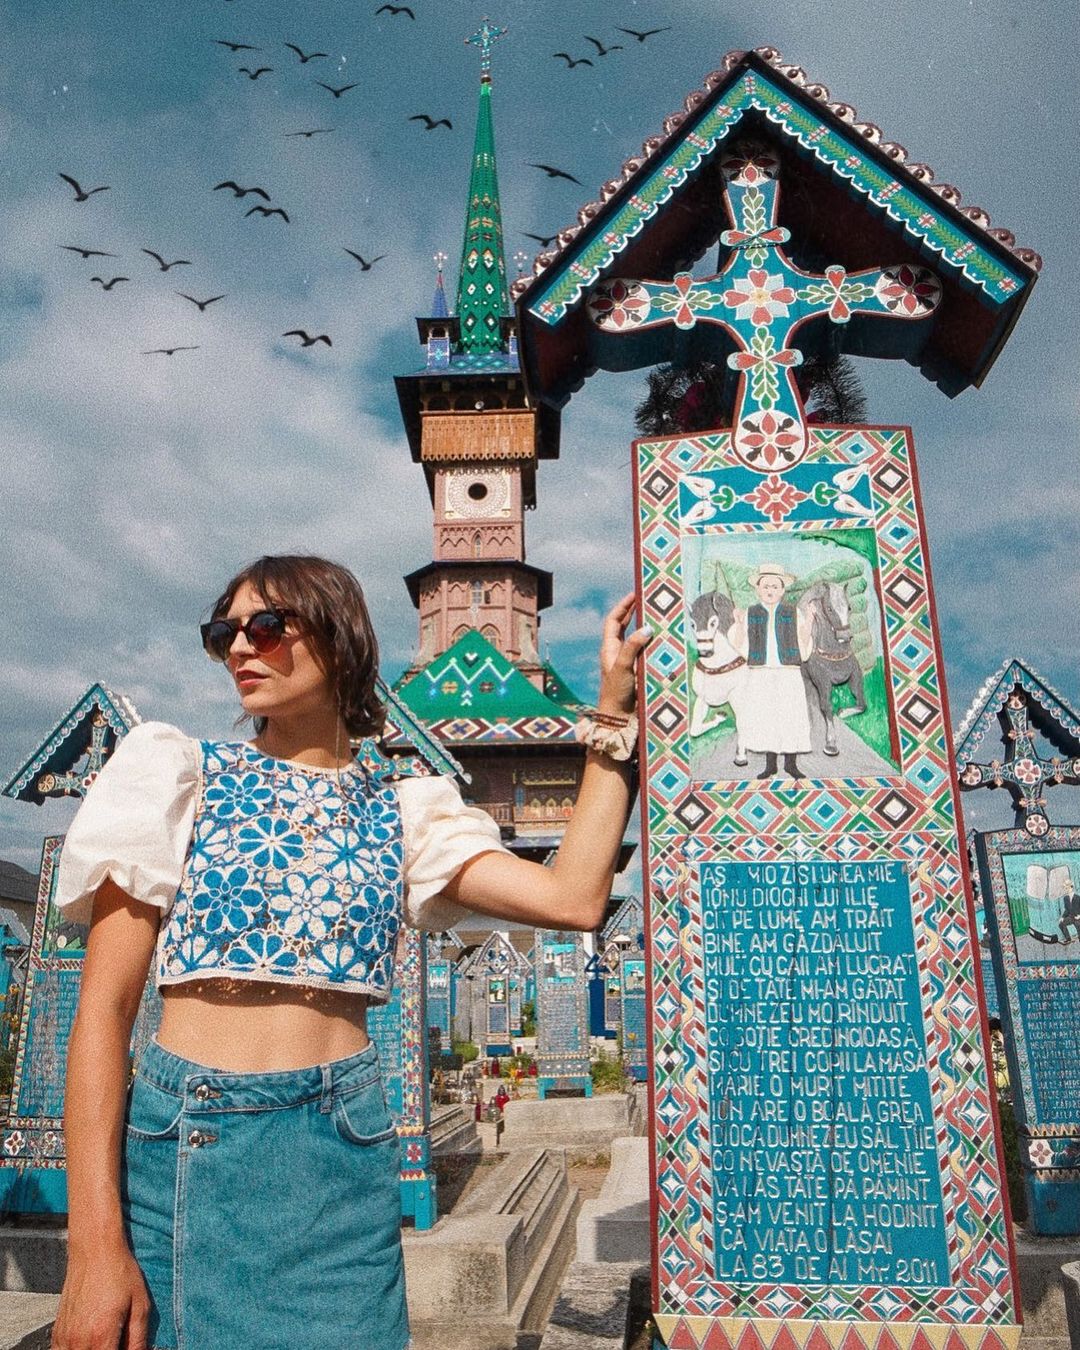 Merry Cemetery - the world’s most colorful graveyard - 25 Famous Landmarks in Romania